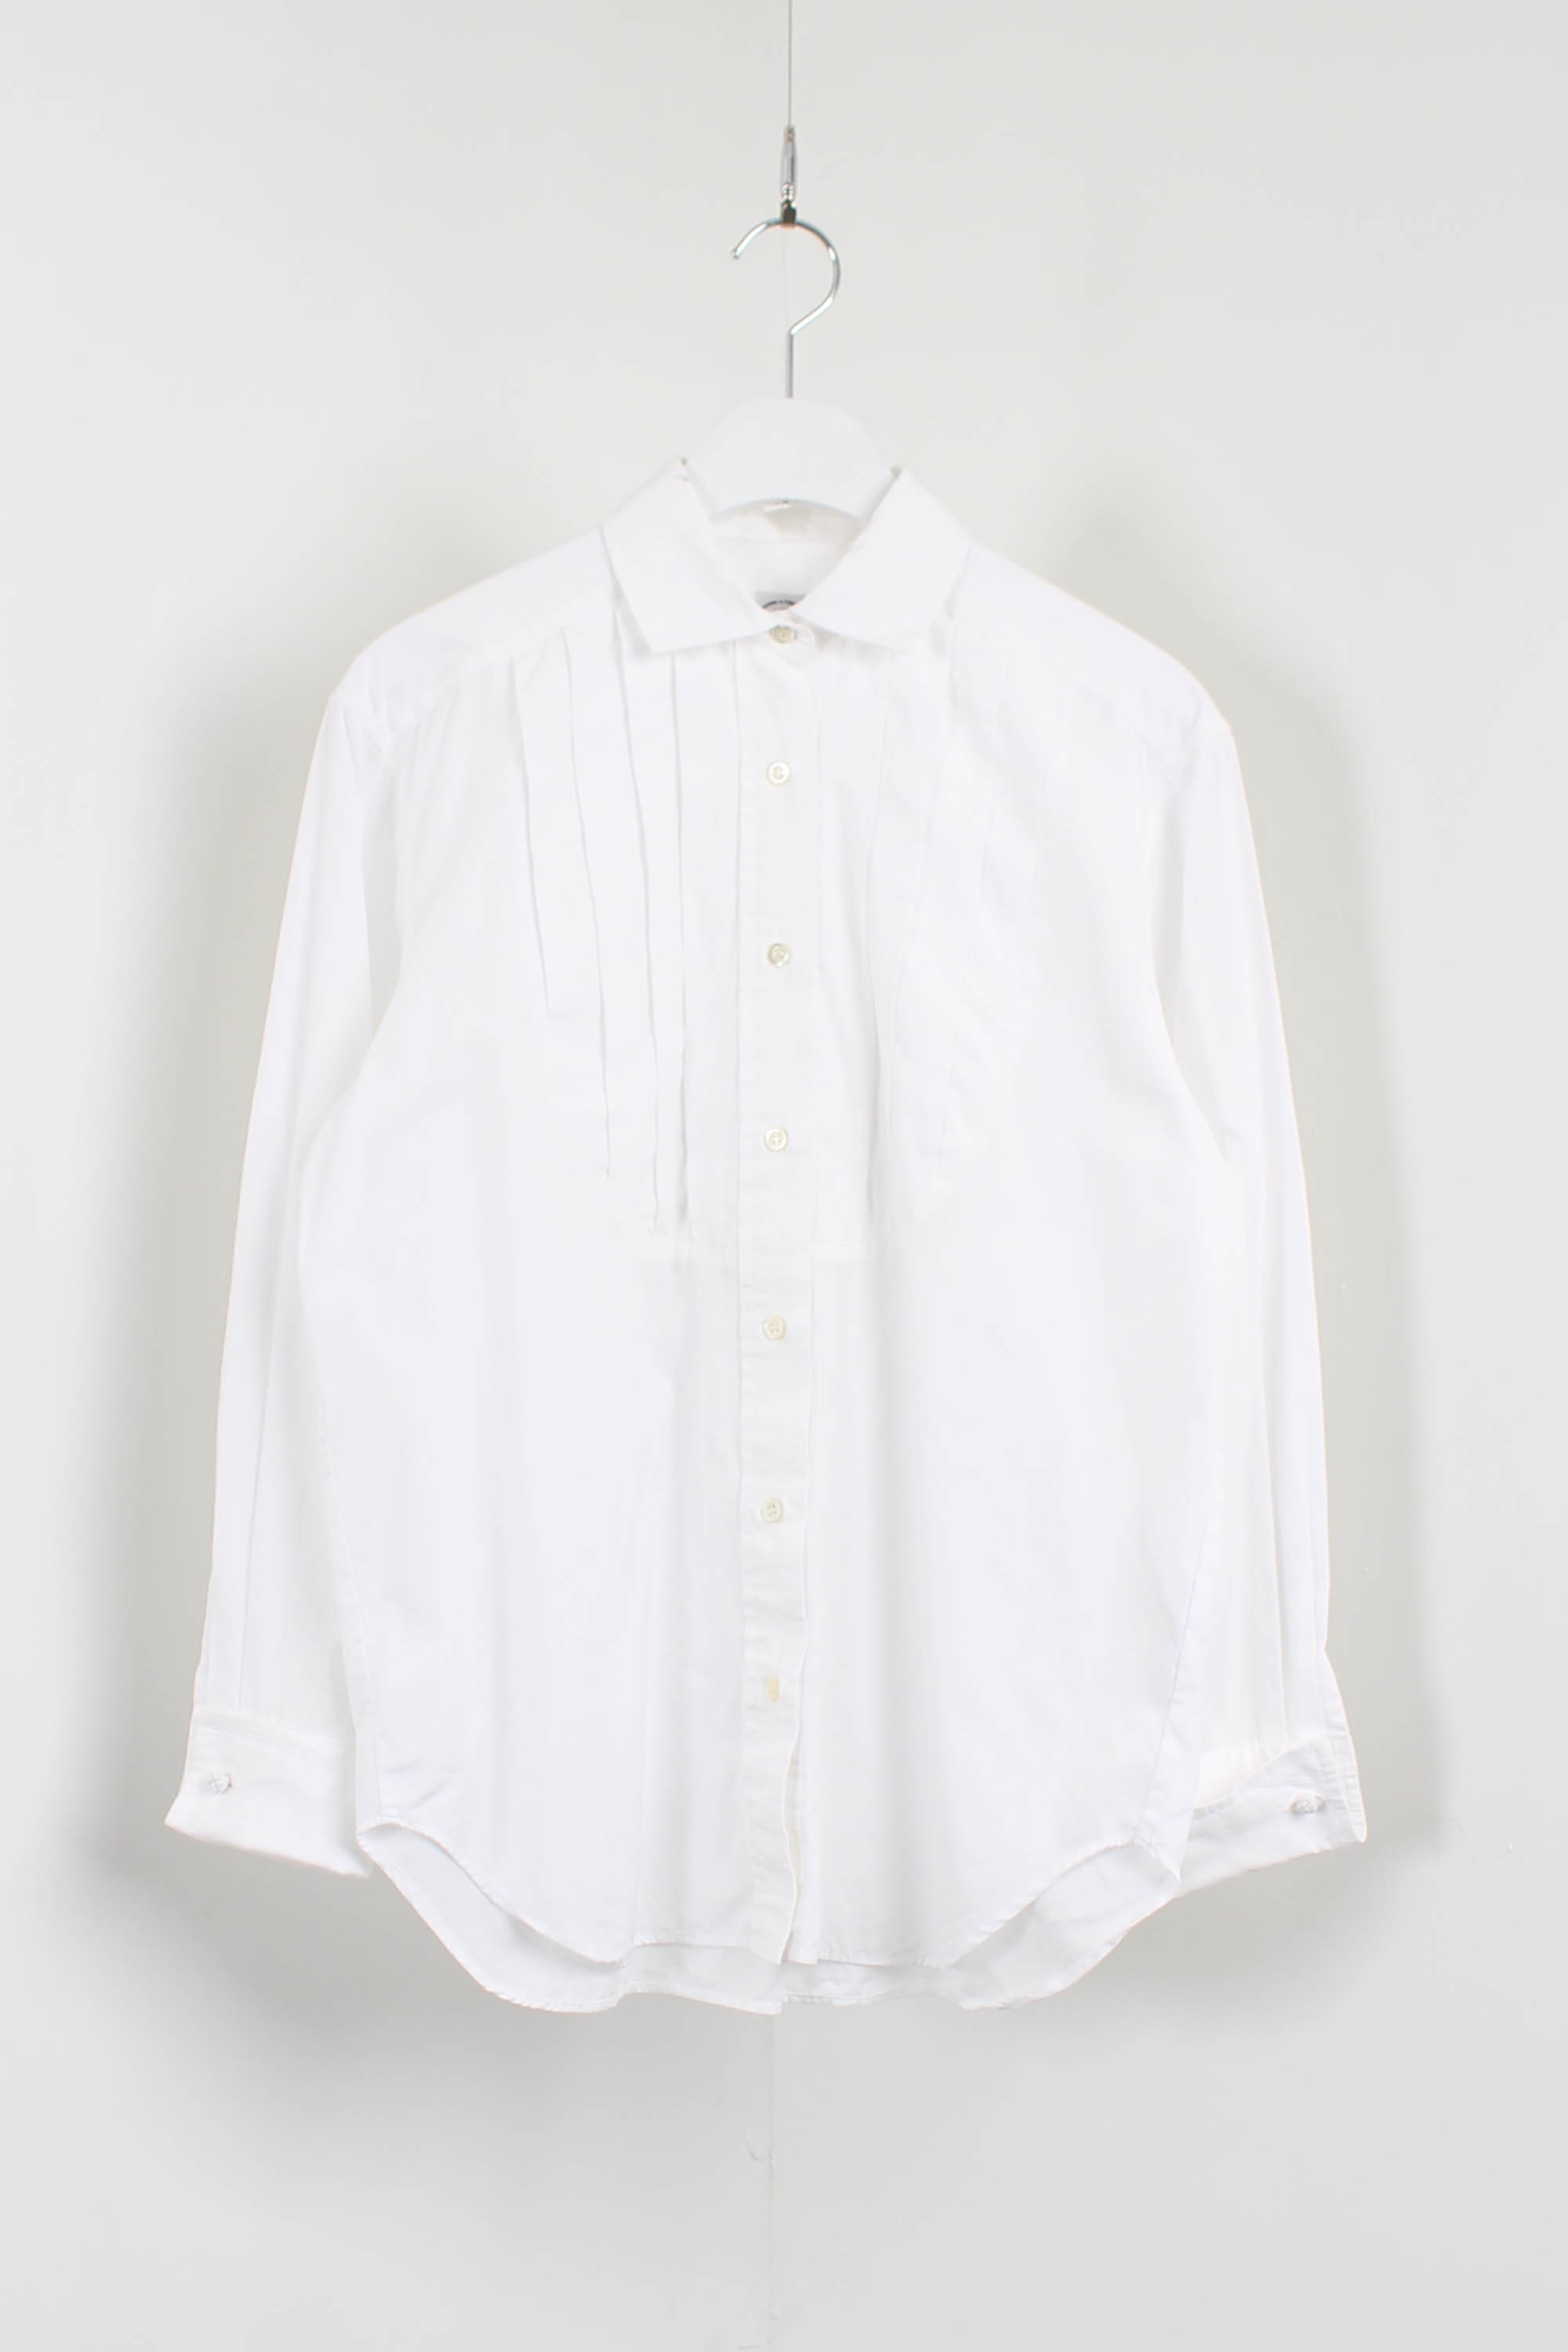 r.arkwright tuck shirt